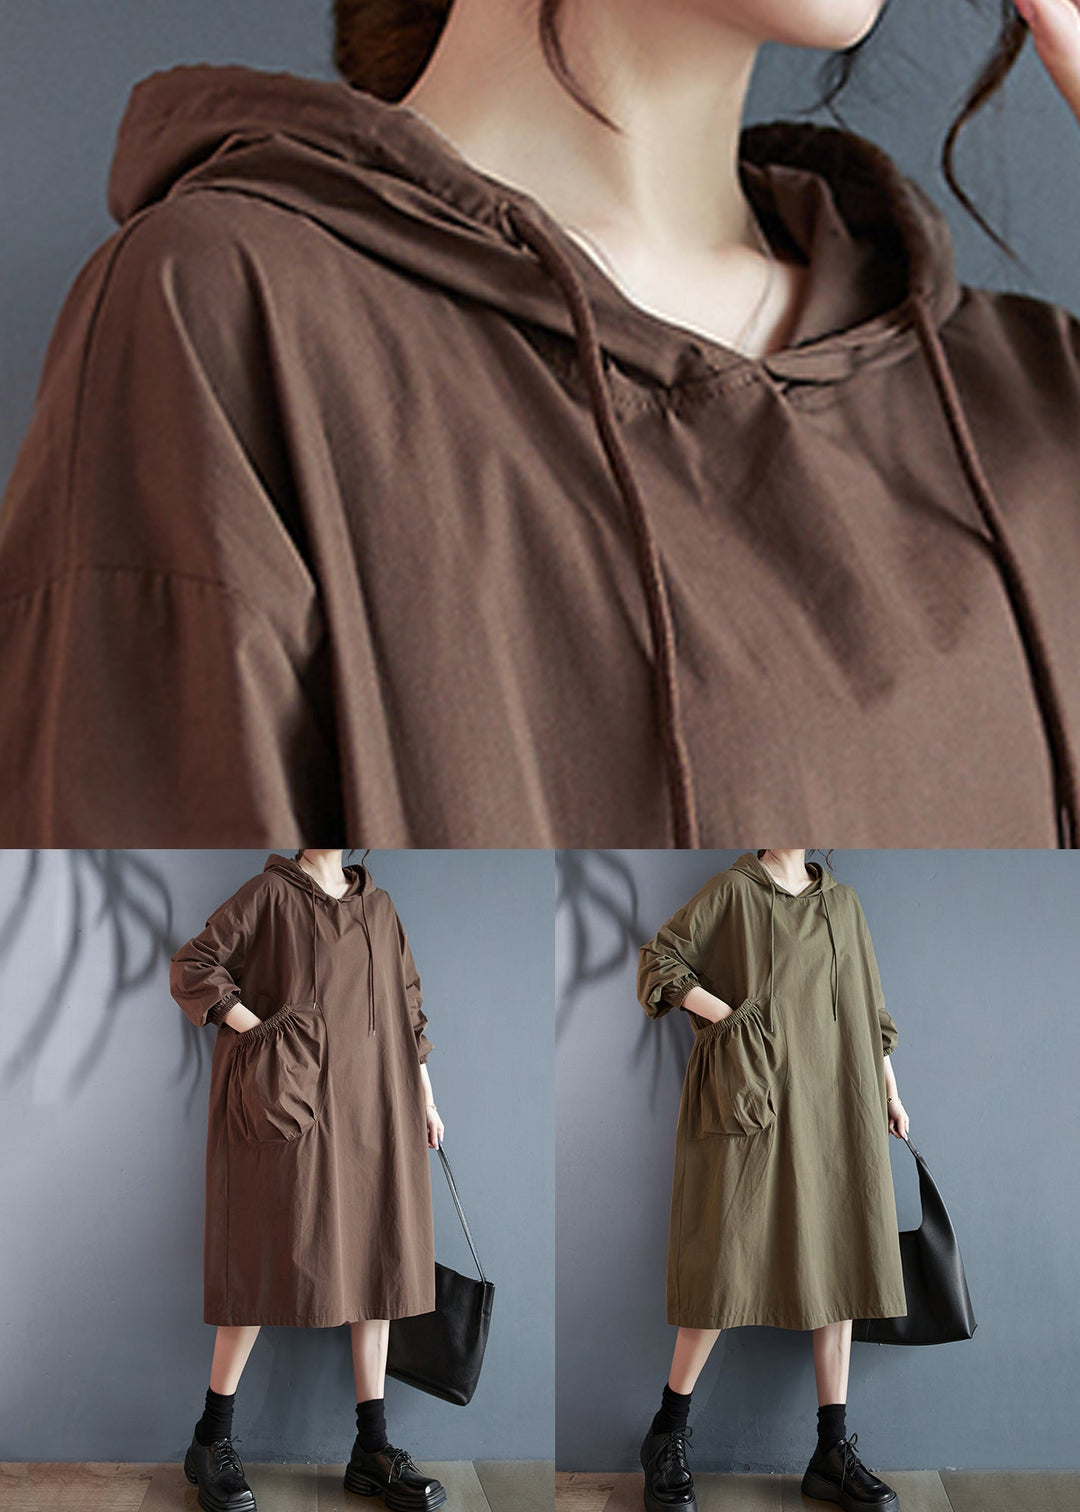 Plus Size Coffee Hooded Pockets Cotton Dress Long Sleeve